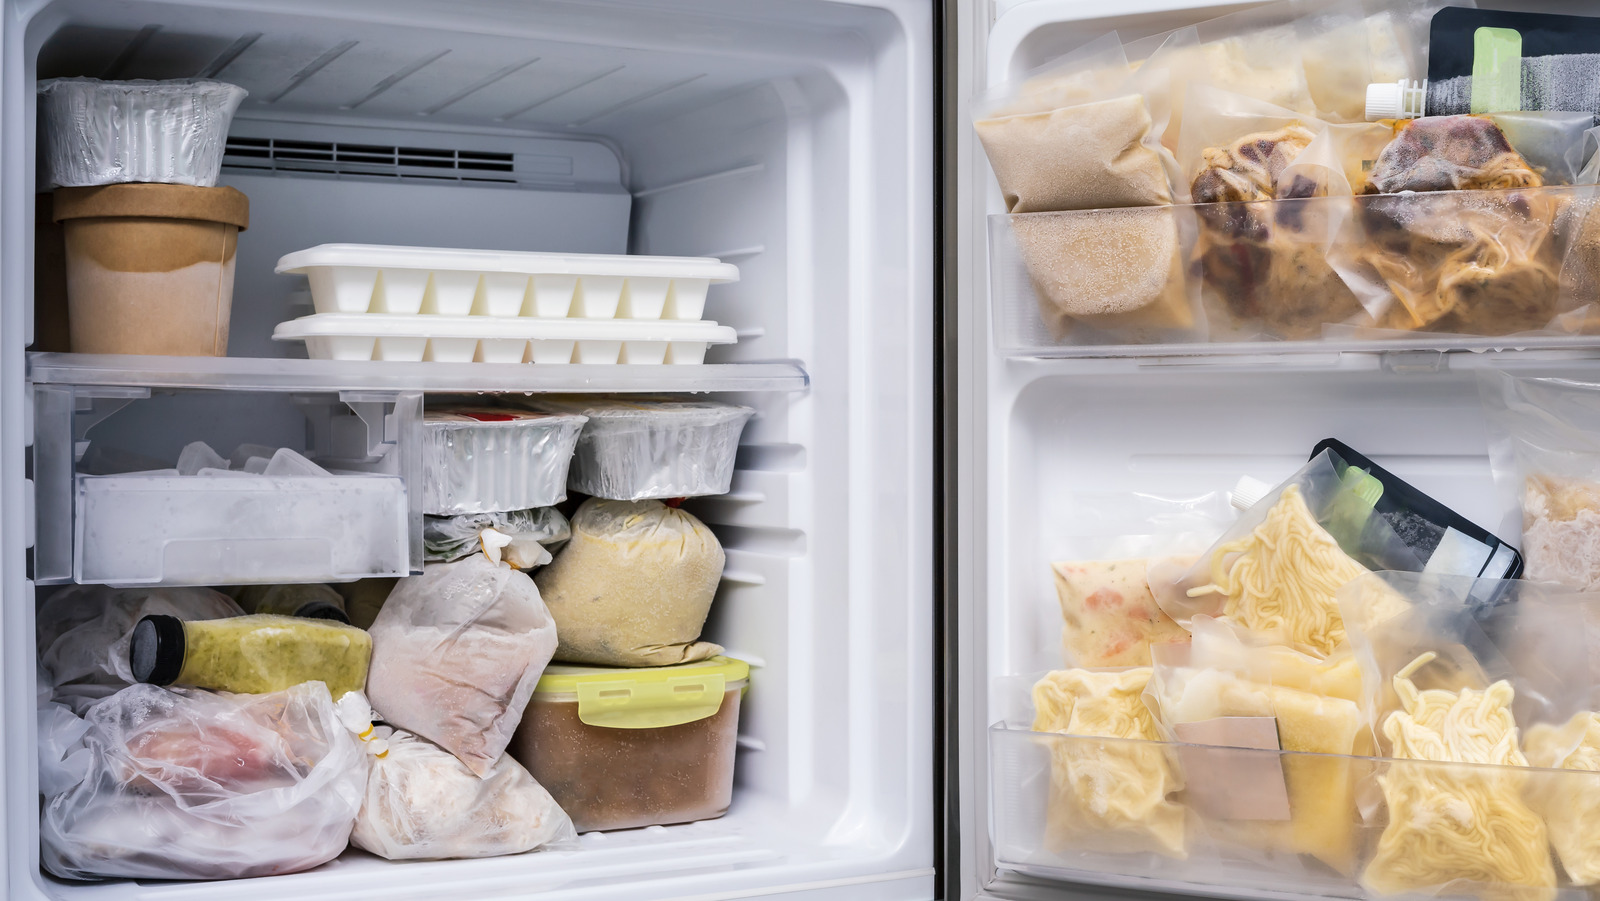 The Reason Your Freezer Doesn't Have A Light